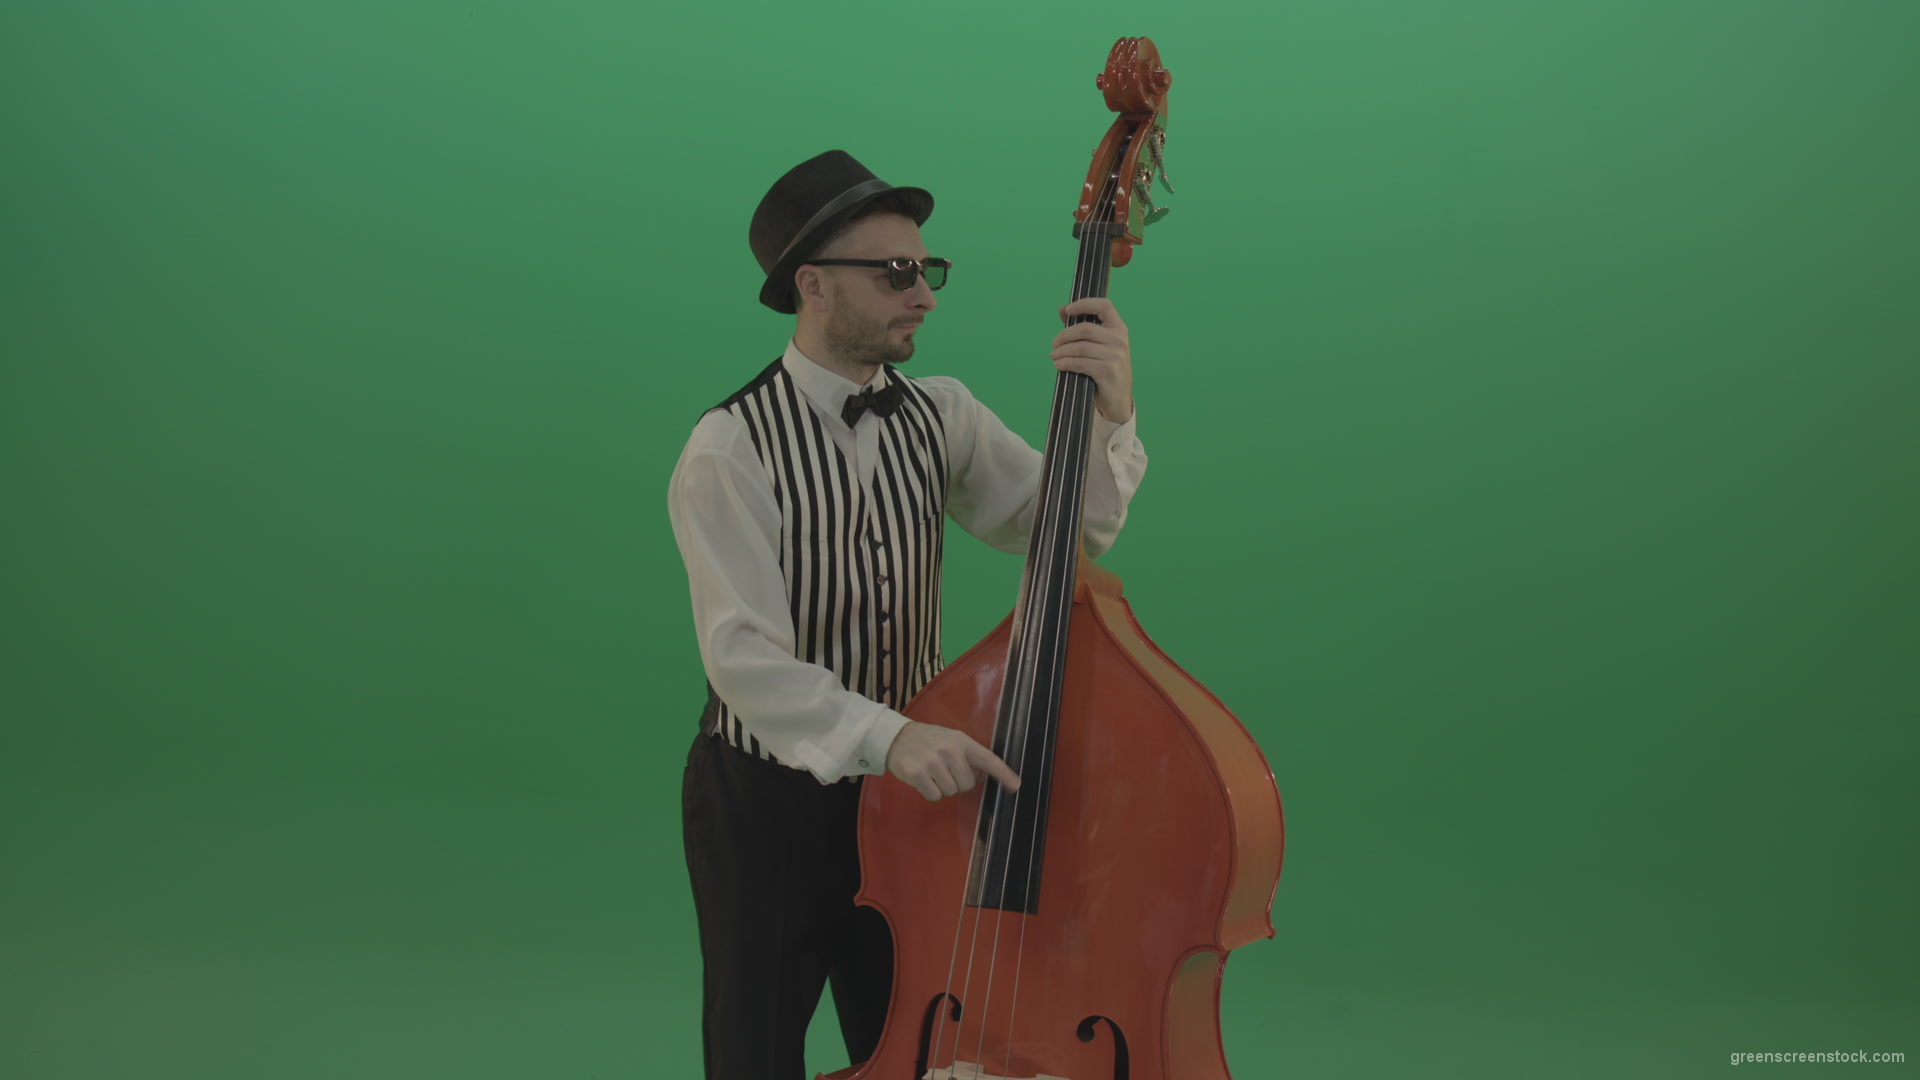 Virtuoso-man-playing-jazz-on-double-bass-String-music-instrument-isolated-on-green-screen_005 Green Screen Stock